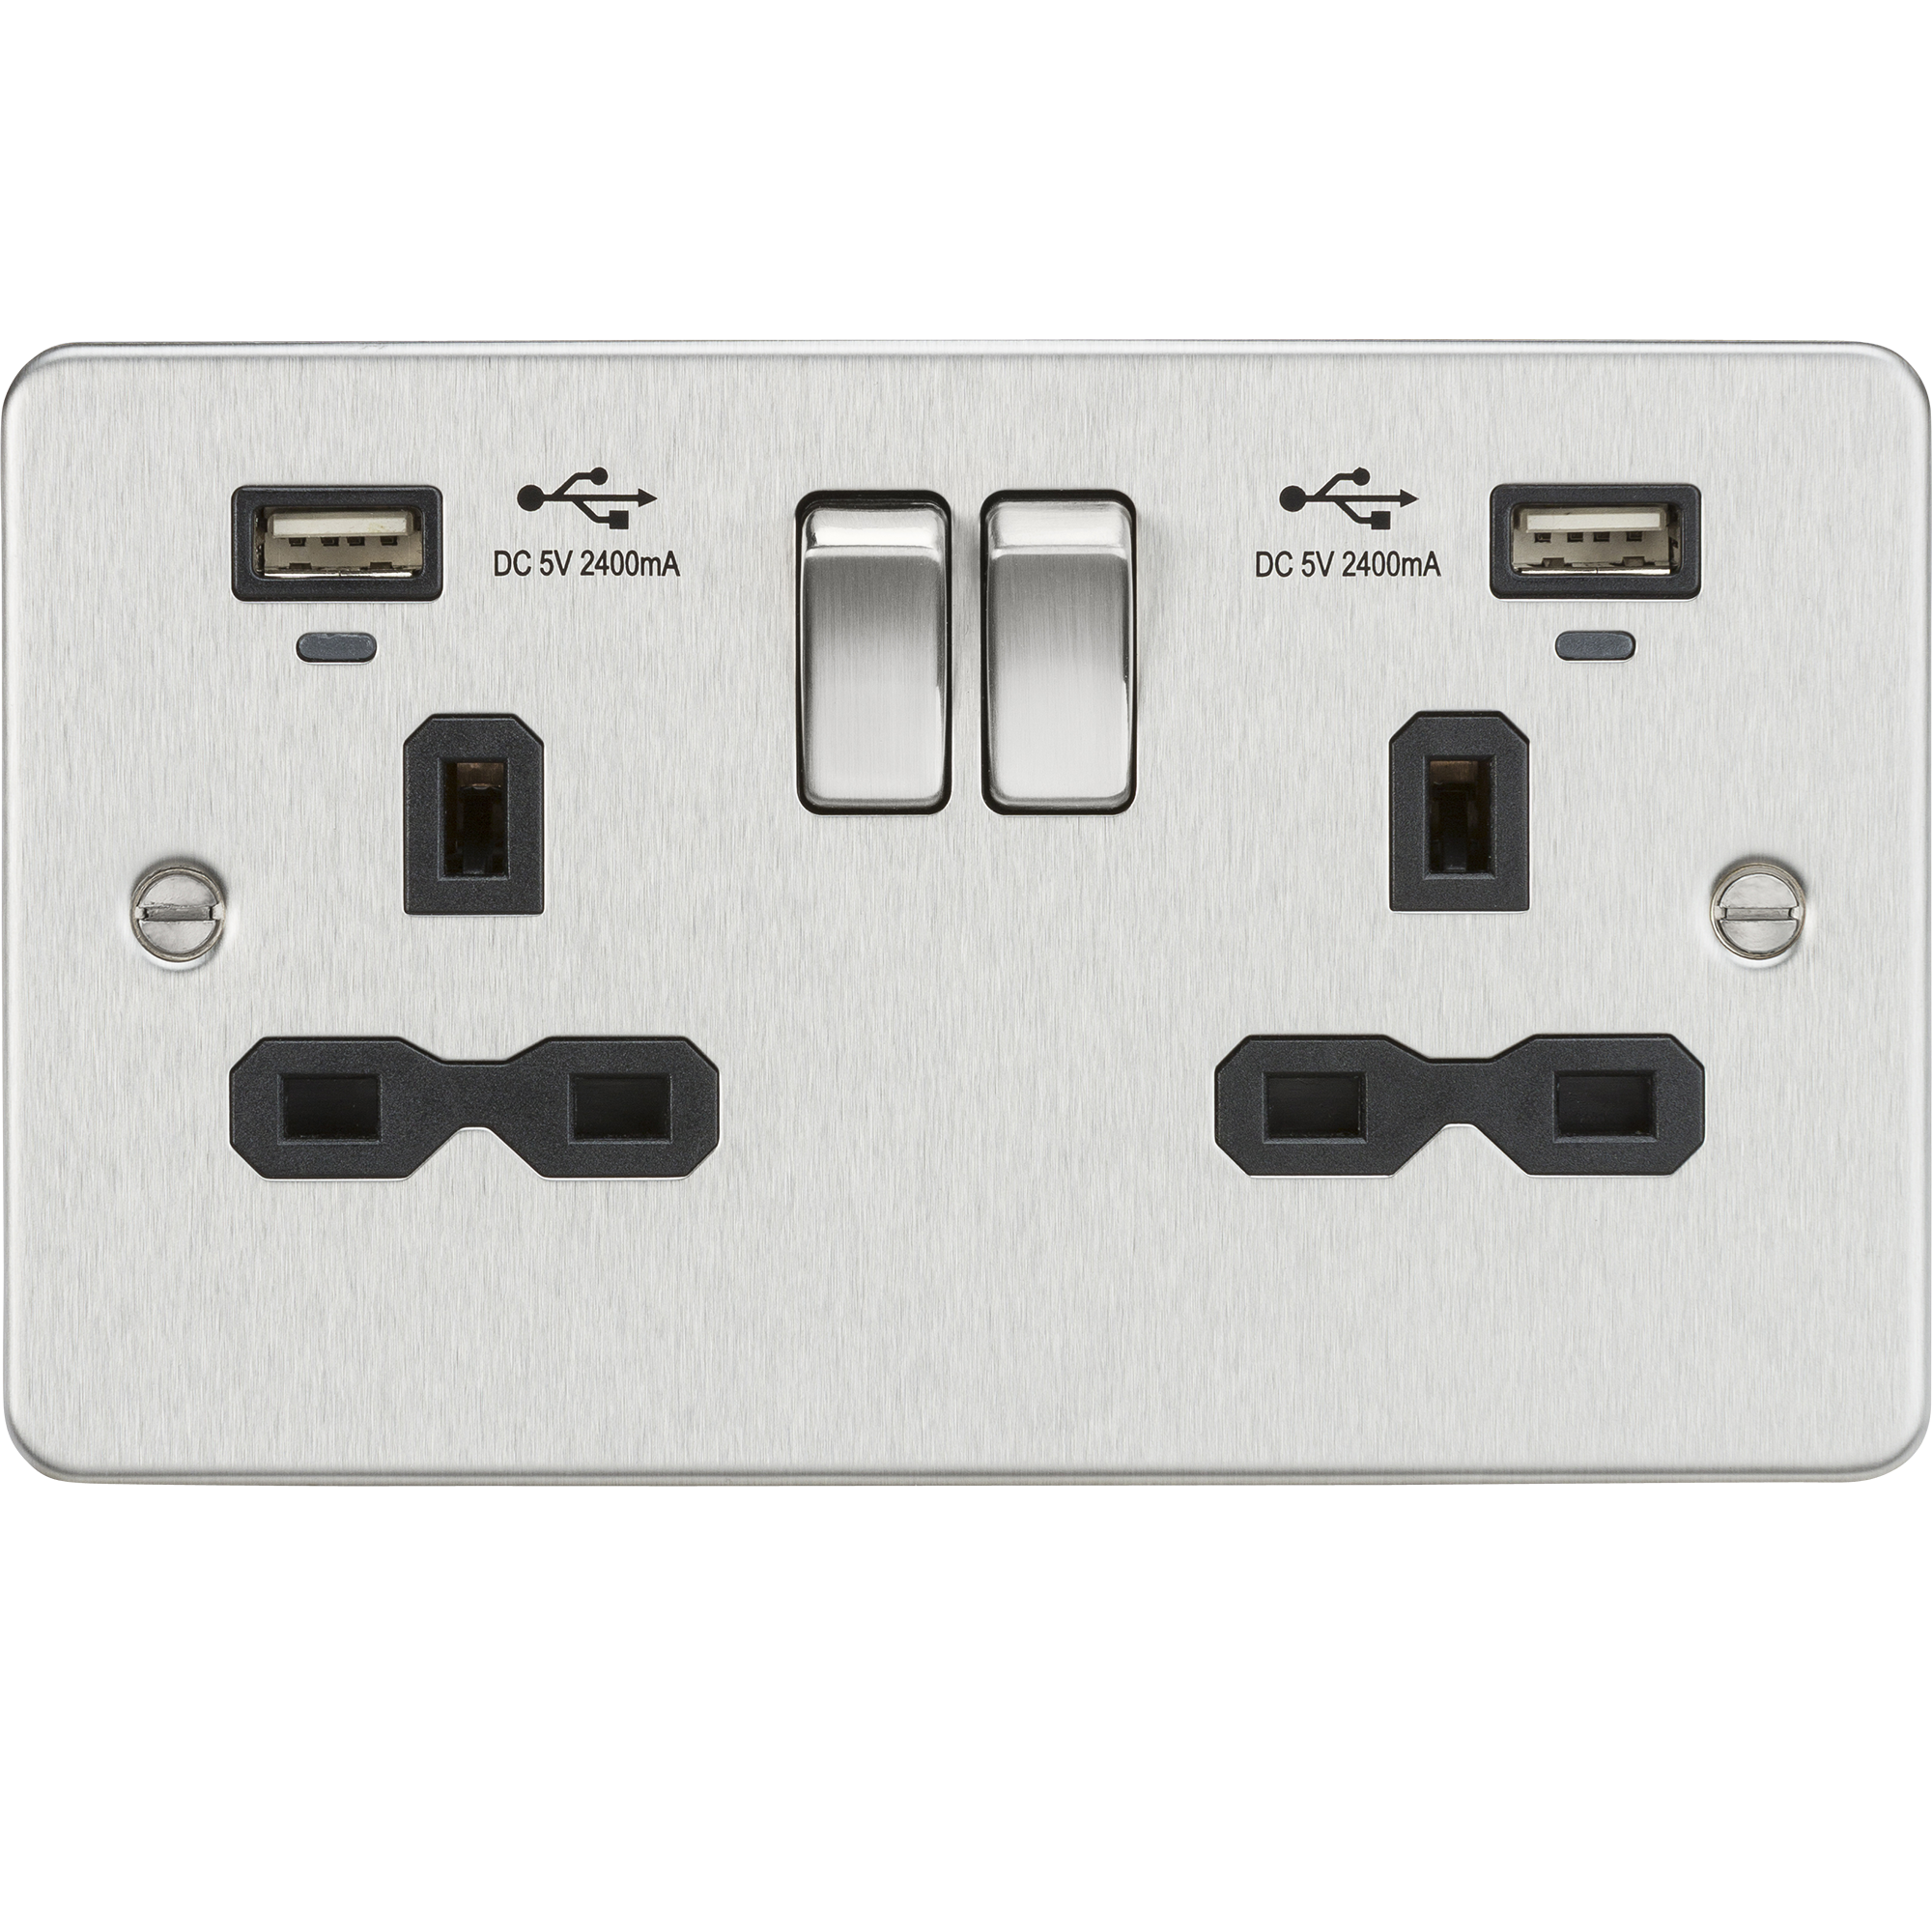 Flat Plate 13A Smart 2G Switched Socket With Dual USB Charger 2.4A - Brushed Chrome With Blk Insert - FPR9904NBC 